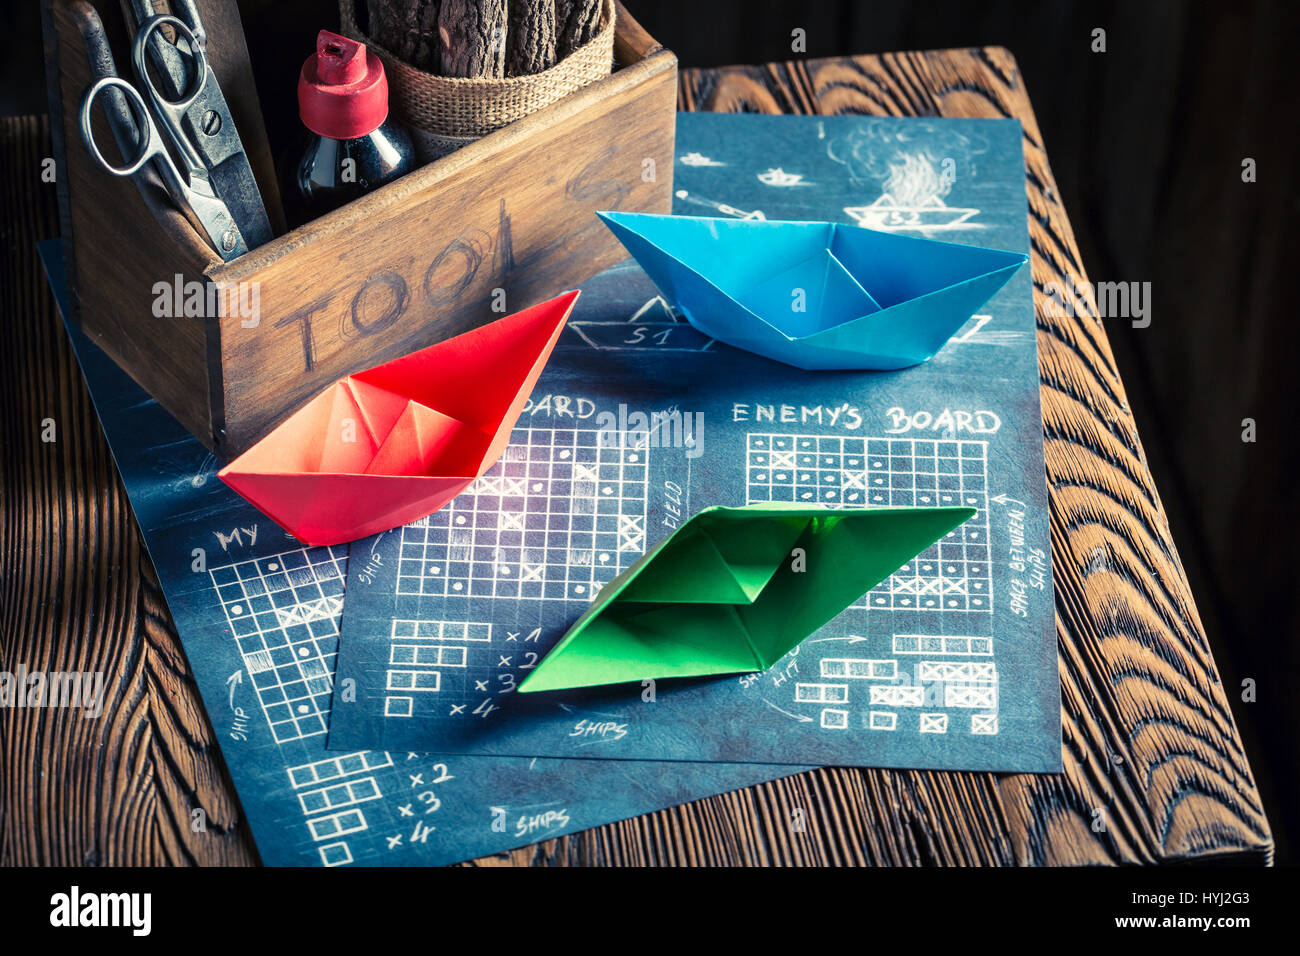 Old battleship paper game with red and blue ships Stock Photo